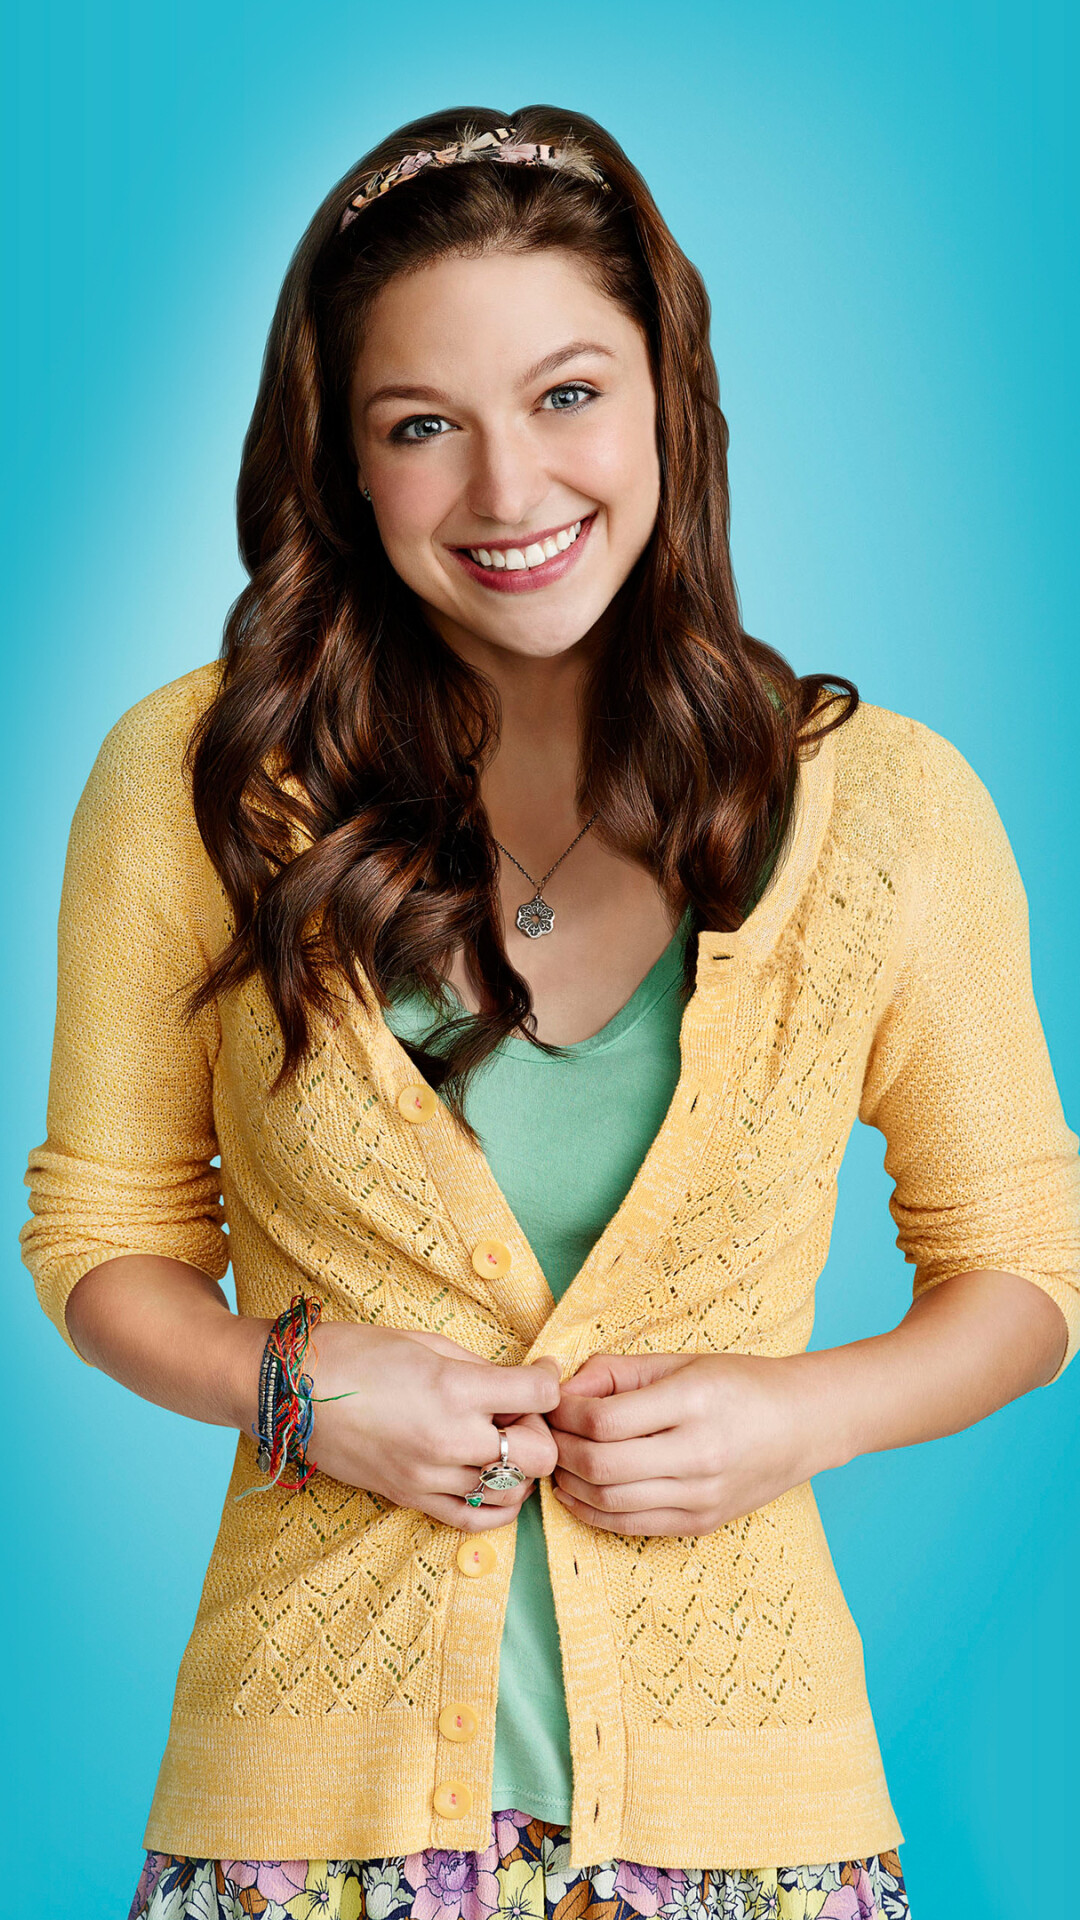 Glee (TV series): Melissa Benoist as Marley Rose, A shy unambitious daughter of McKinley High's cafeteria lady. 1080x1920 Full HD Background.